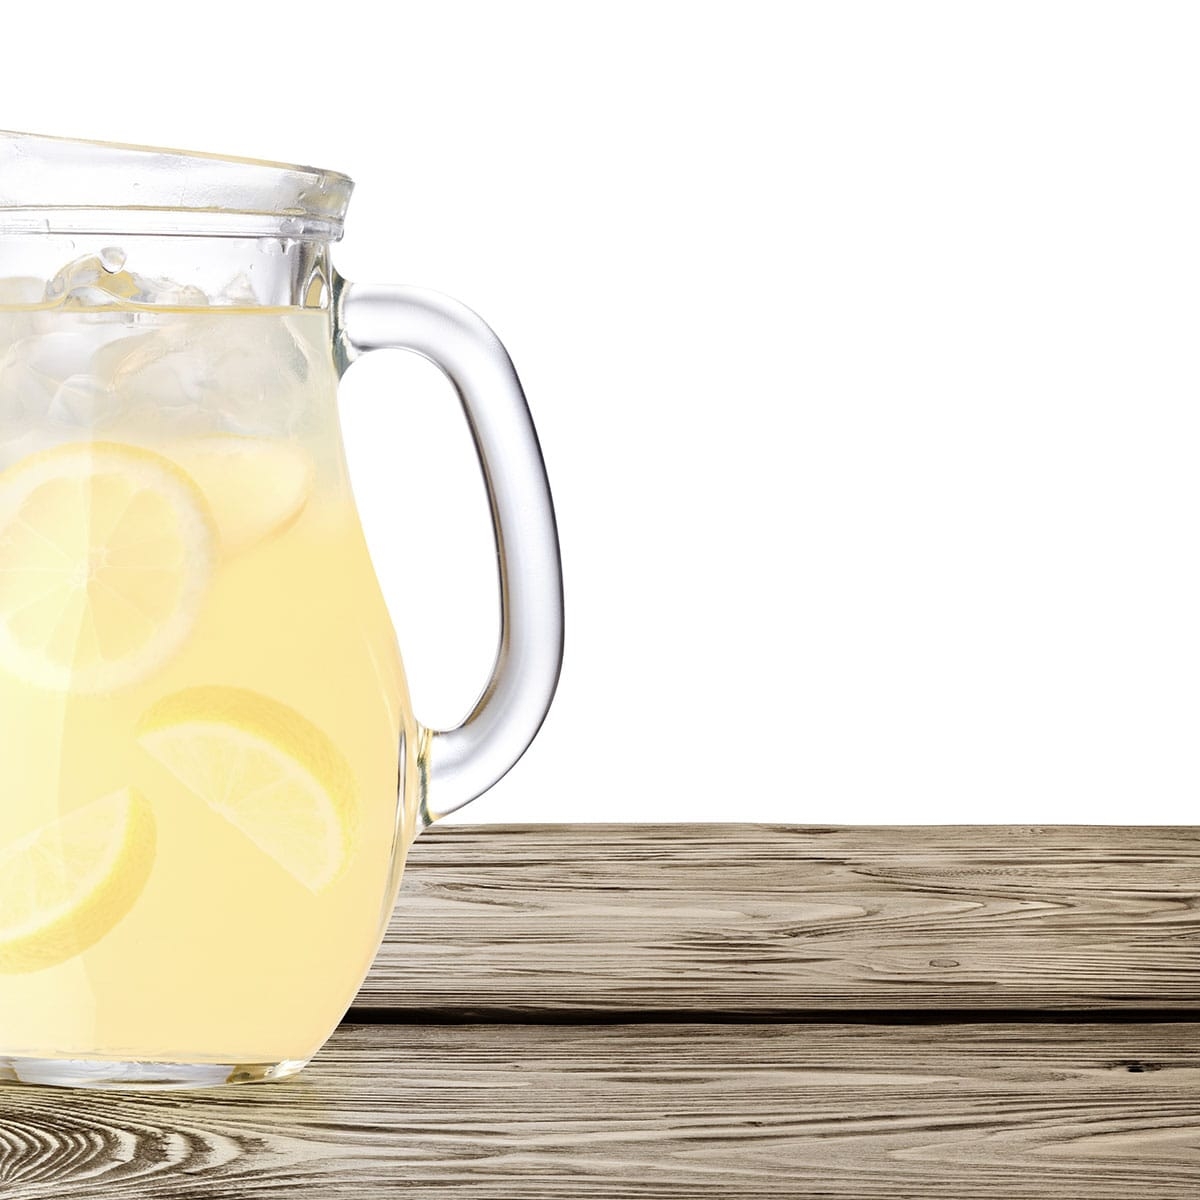 National Lemonade Day August 20 2019 National Today